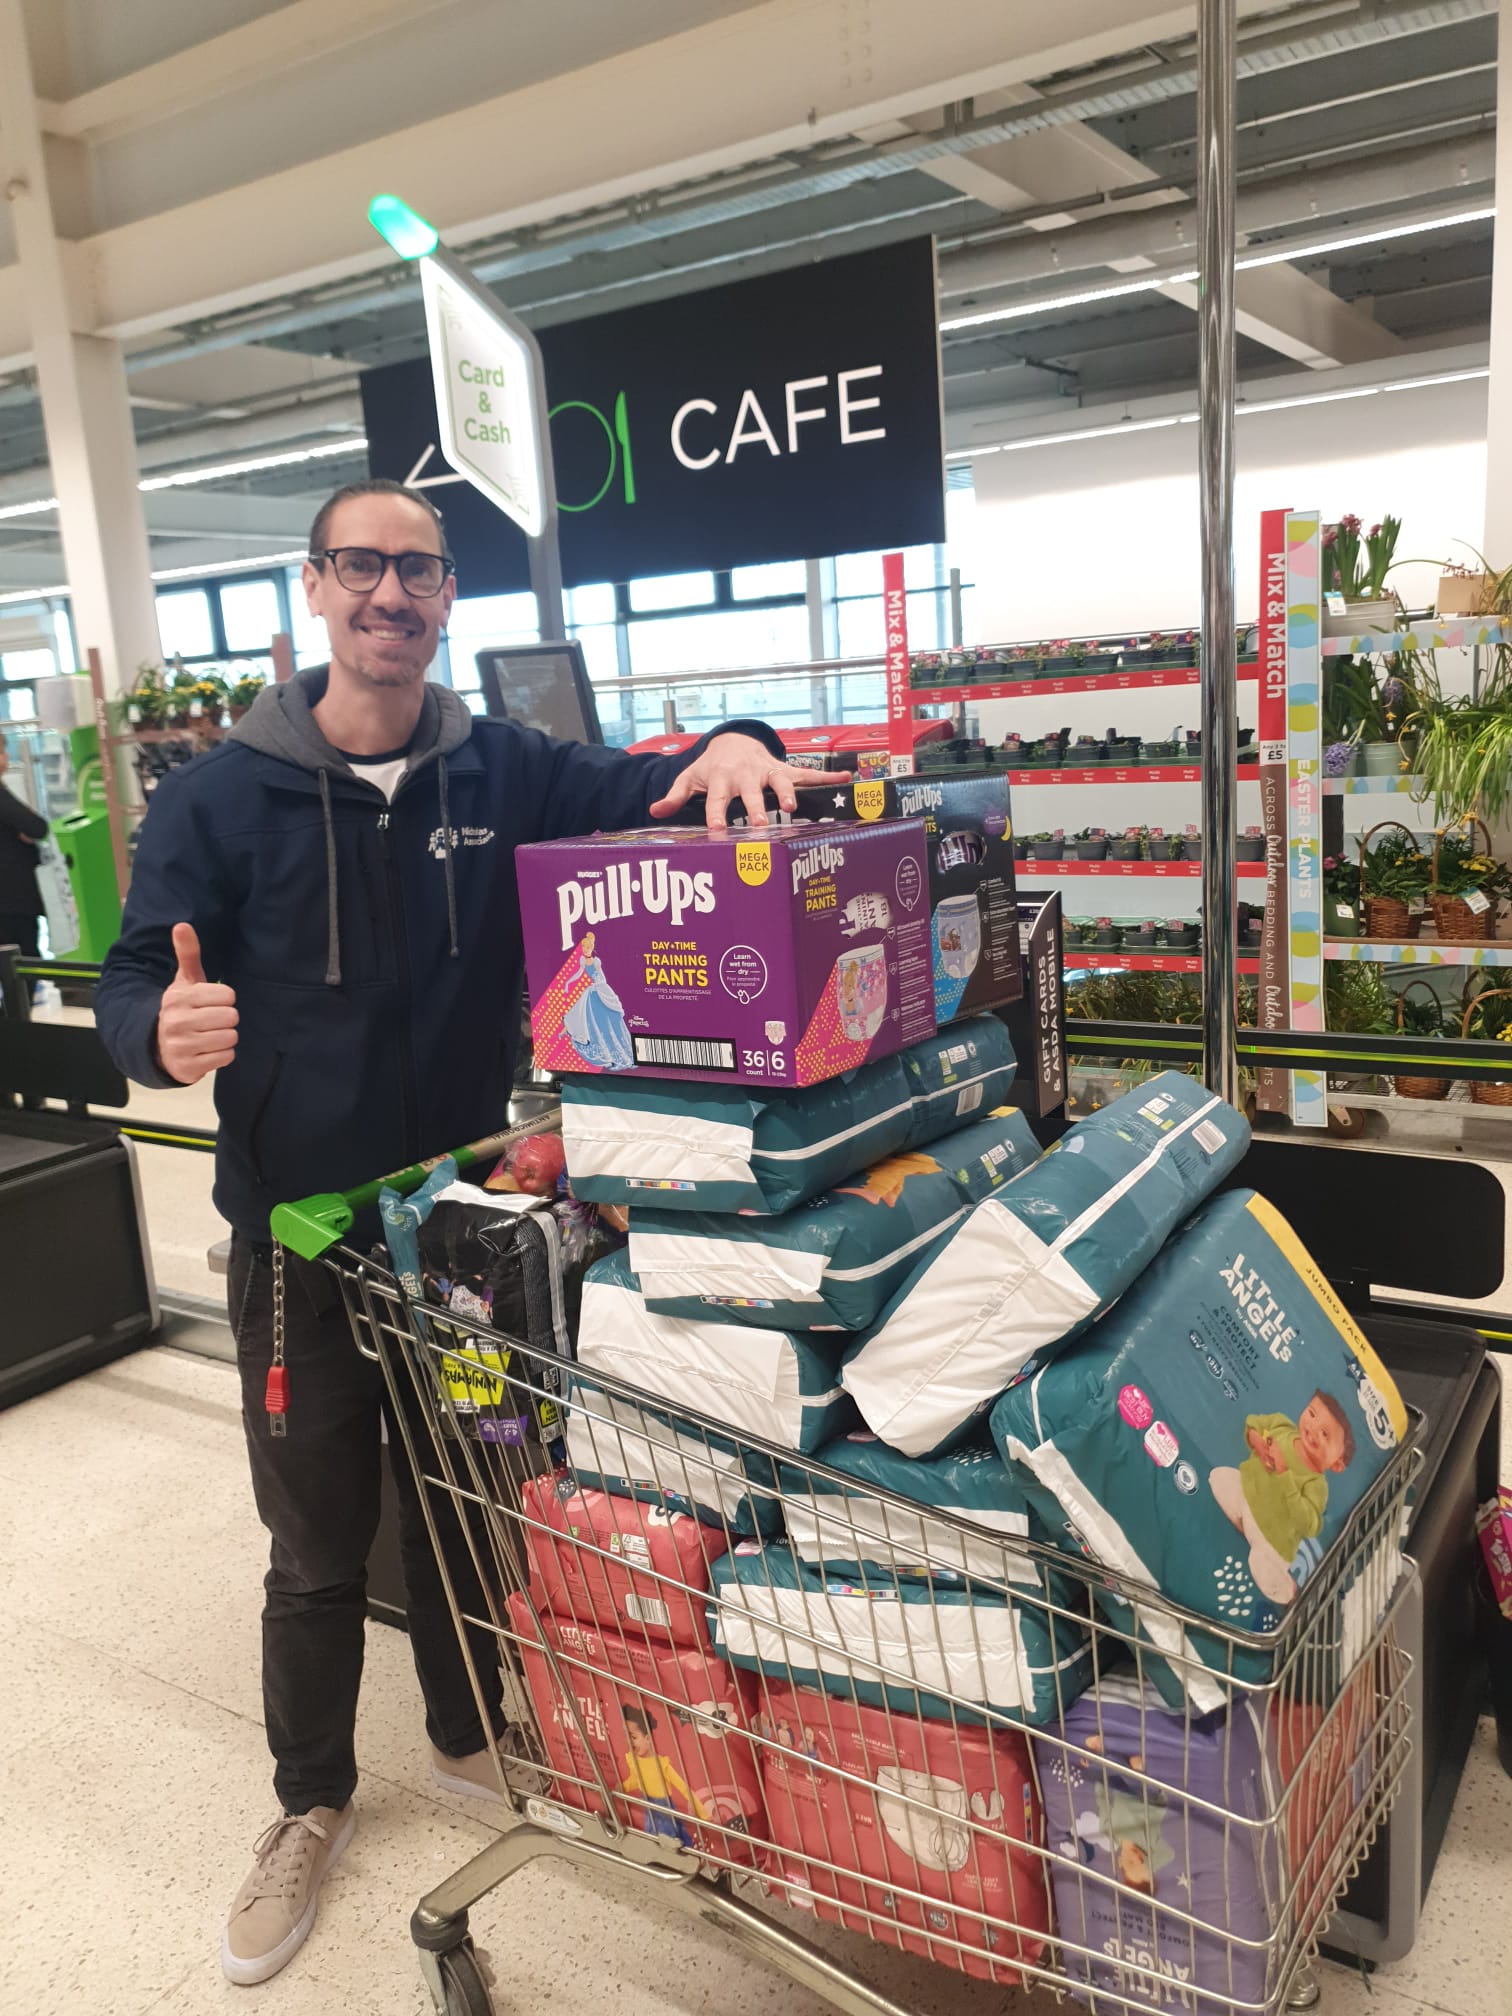 James purchasing nappies to donate to the local support centre